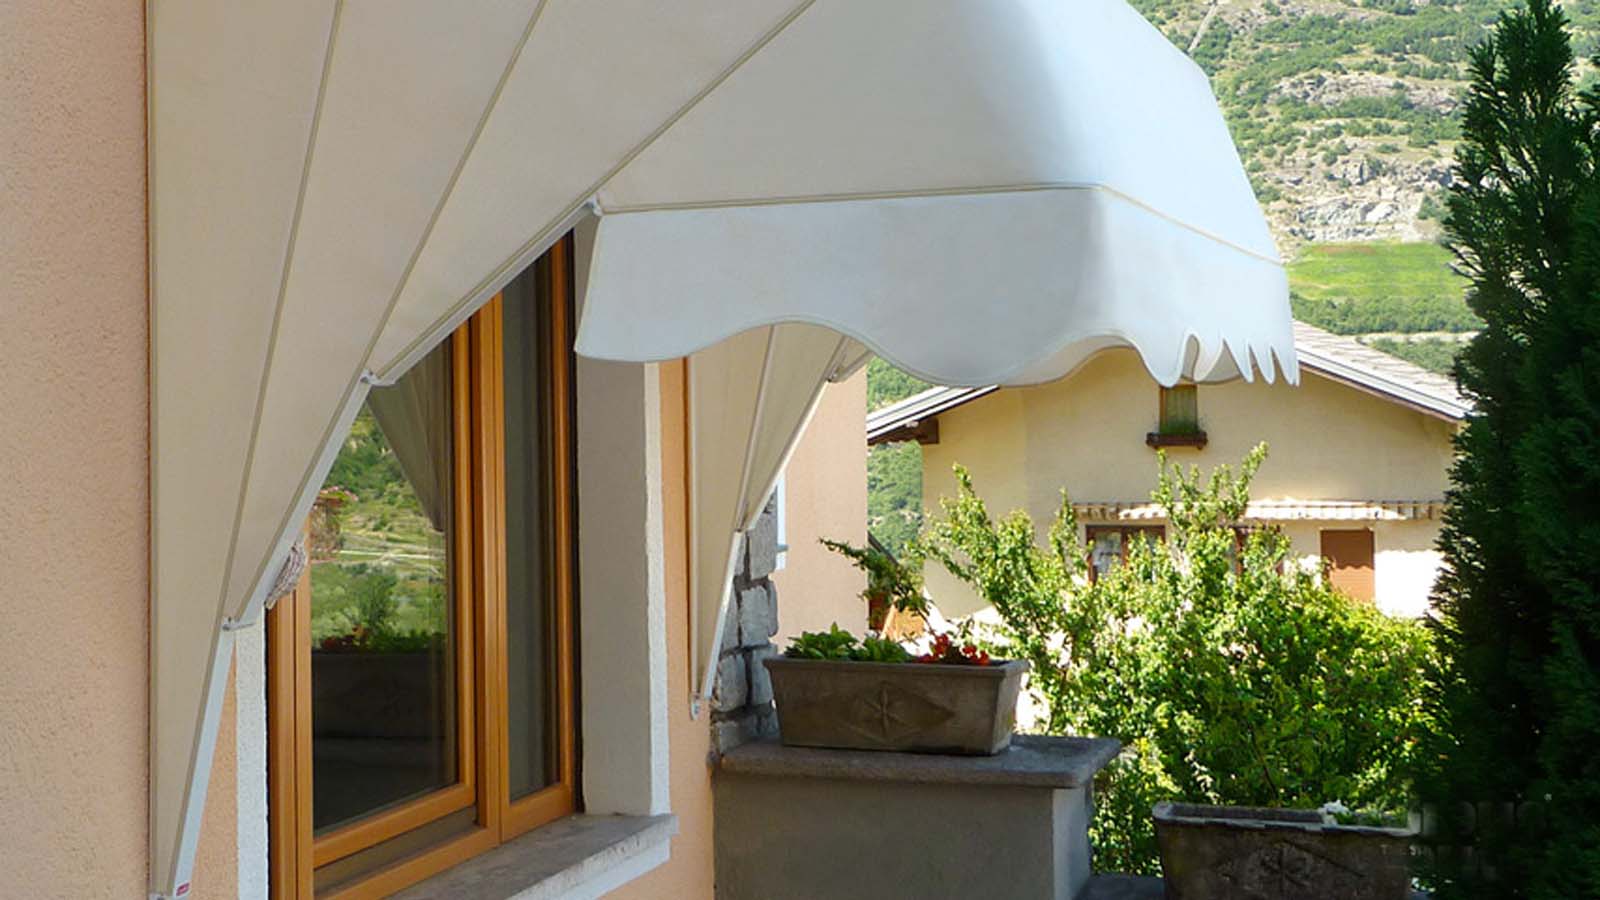 Residential Canopy image - sun protection.